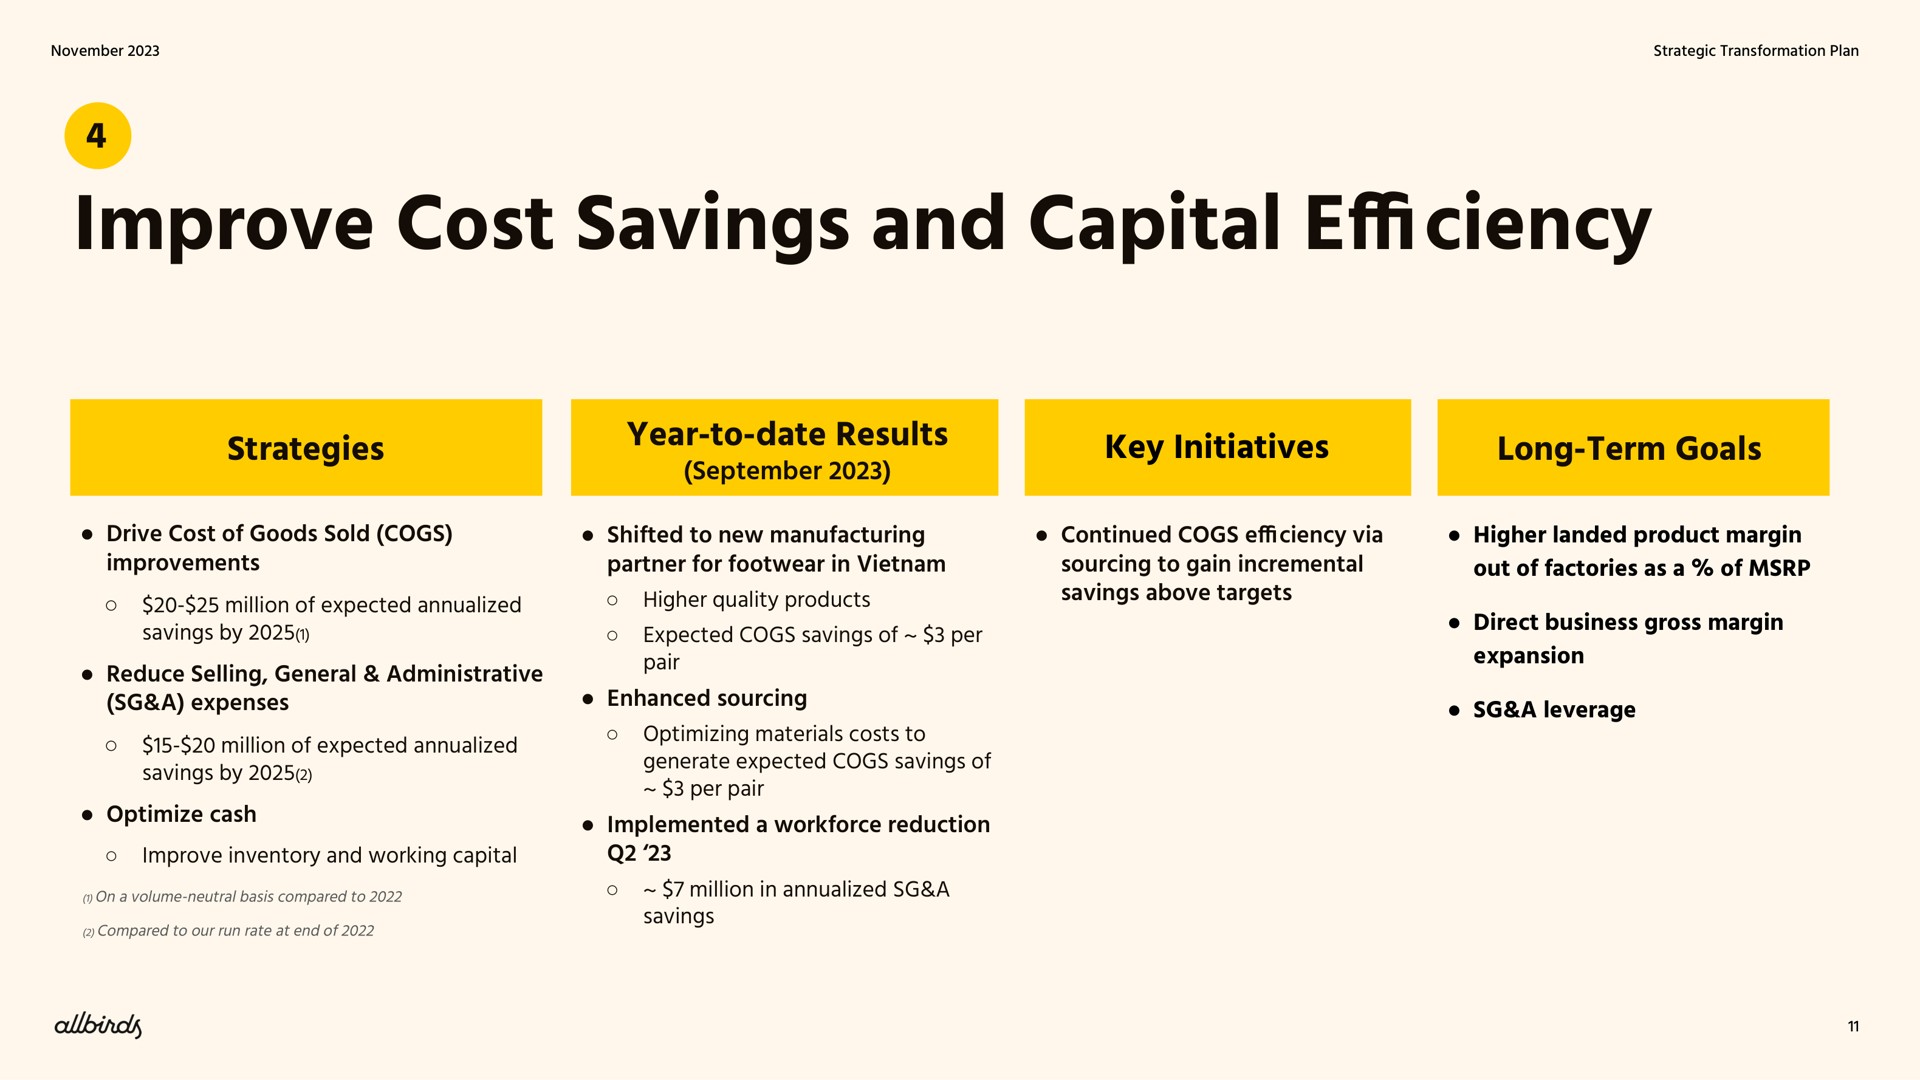 improve cost savings and capital efficiency strategies year to date results key initiatives long term goals drive cost of goods sold cogs shifted to new manufacturing improvements million of expected savings by partner for footwear in higher quality products expected cogs savings of per reduce selling general administrative a expenses million of expected savings by optimize cash improve inventory and working capital pair enhanced sourcing optimizing materials costs to generate expected cogs savings of per pair implemented a reduction million in a savings continued cogs efficiency via sourcing to gain incremental savings above targets higher landed product margin out of factories as a of direct business gross margin expansion a leverage | Allbirds